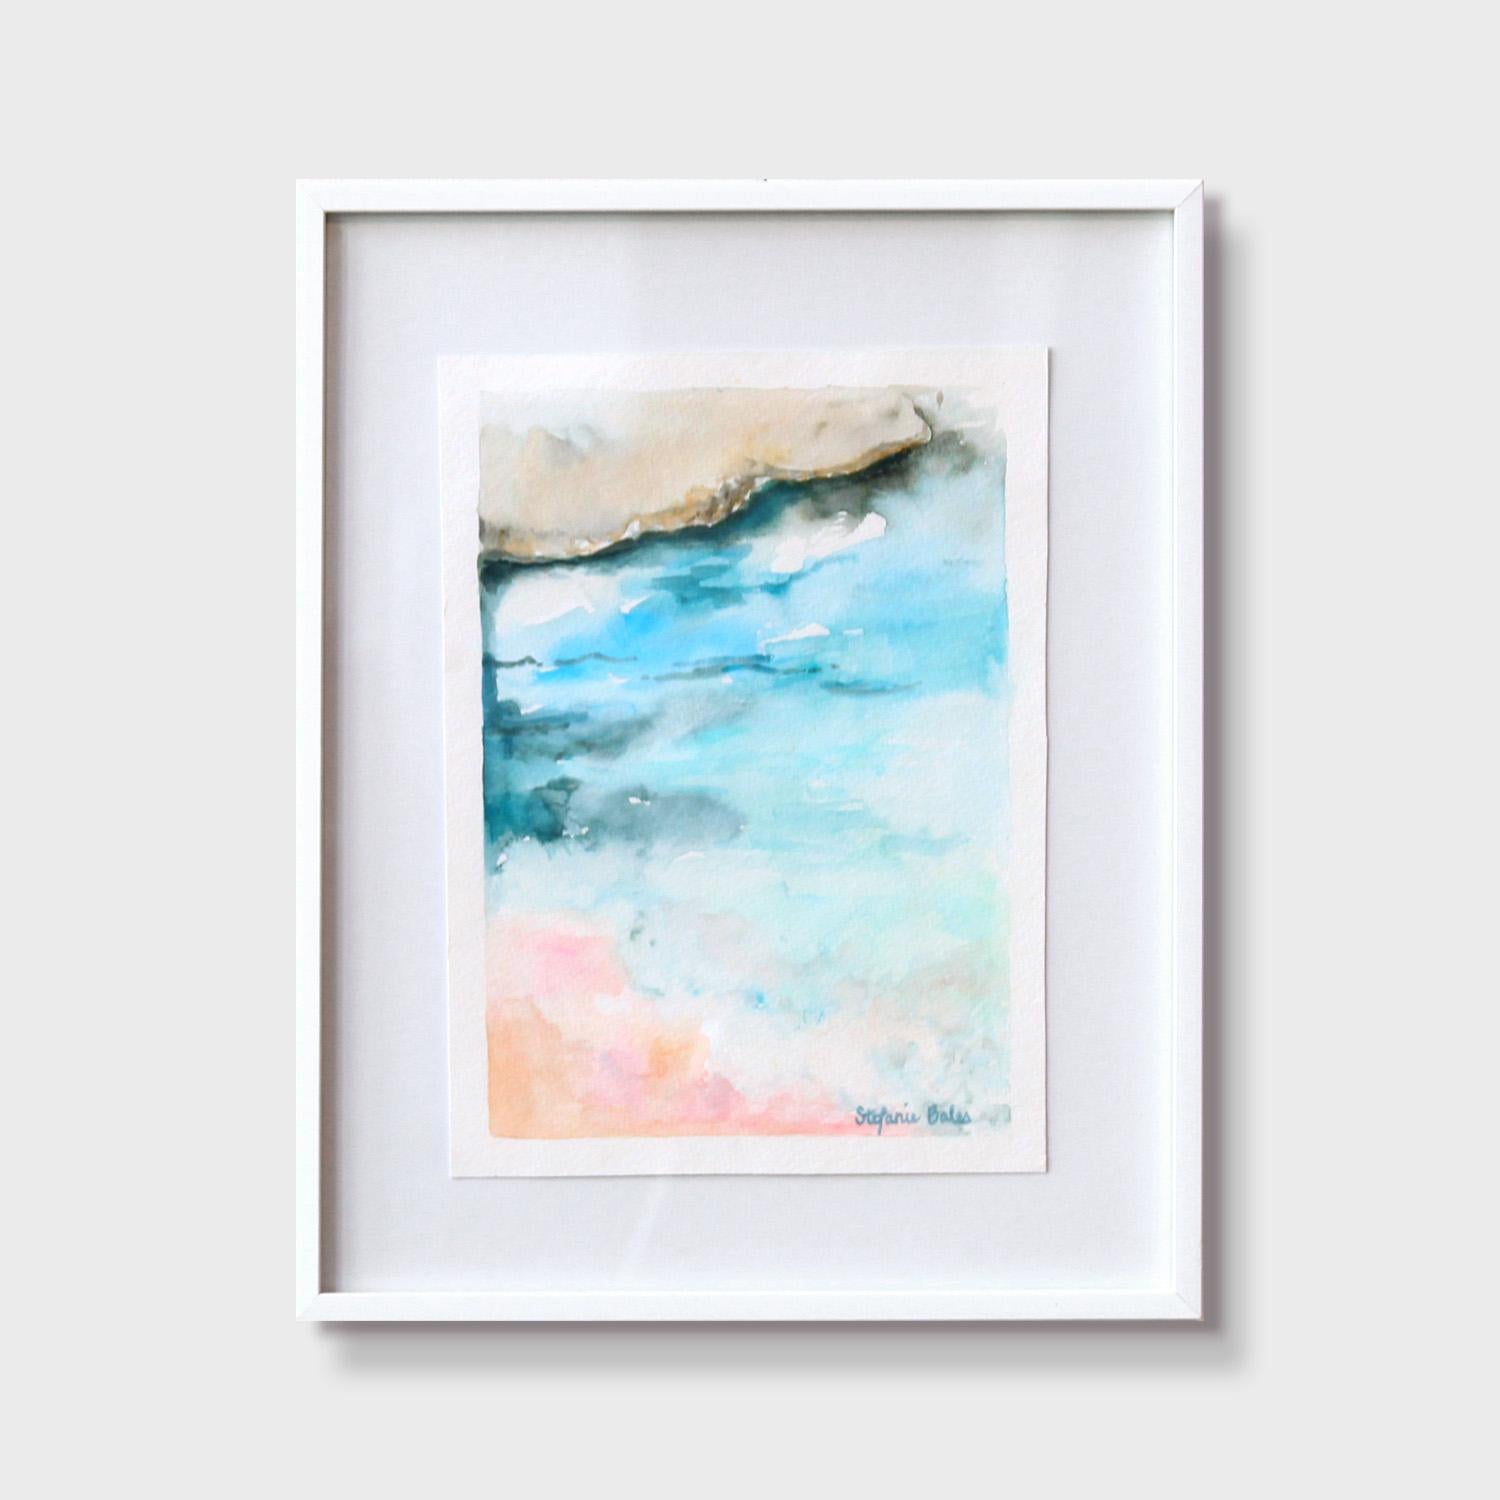 A one of a kind 12x15 Abstract Impressionist Watercolor on Paper Landscape Painting executed by artist Stefanie Bales. A certificate of authenticity will be provided upon its purchase or delivery. 

All of Stefanie Bales’ work reflects on the